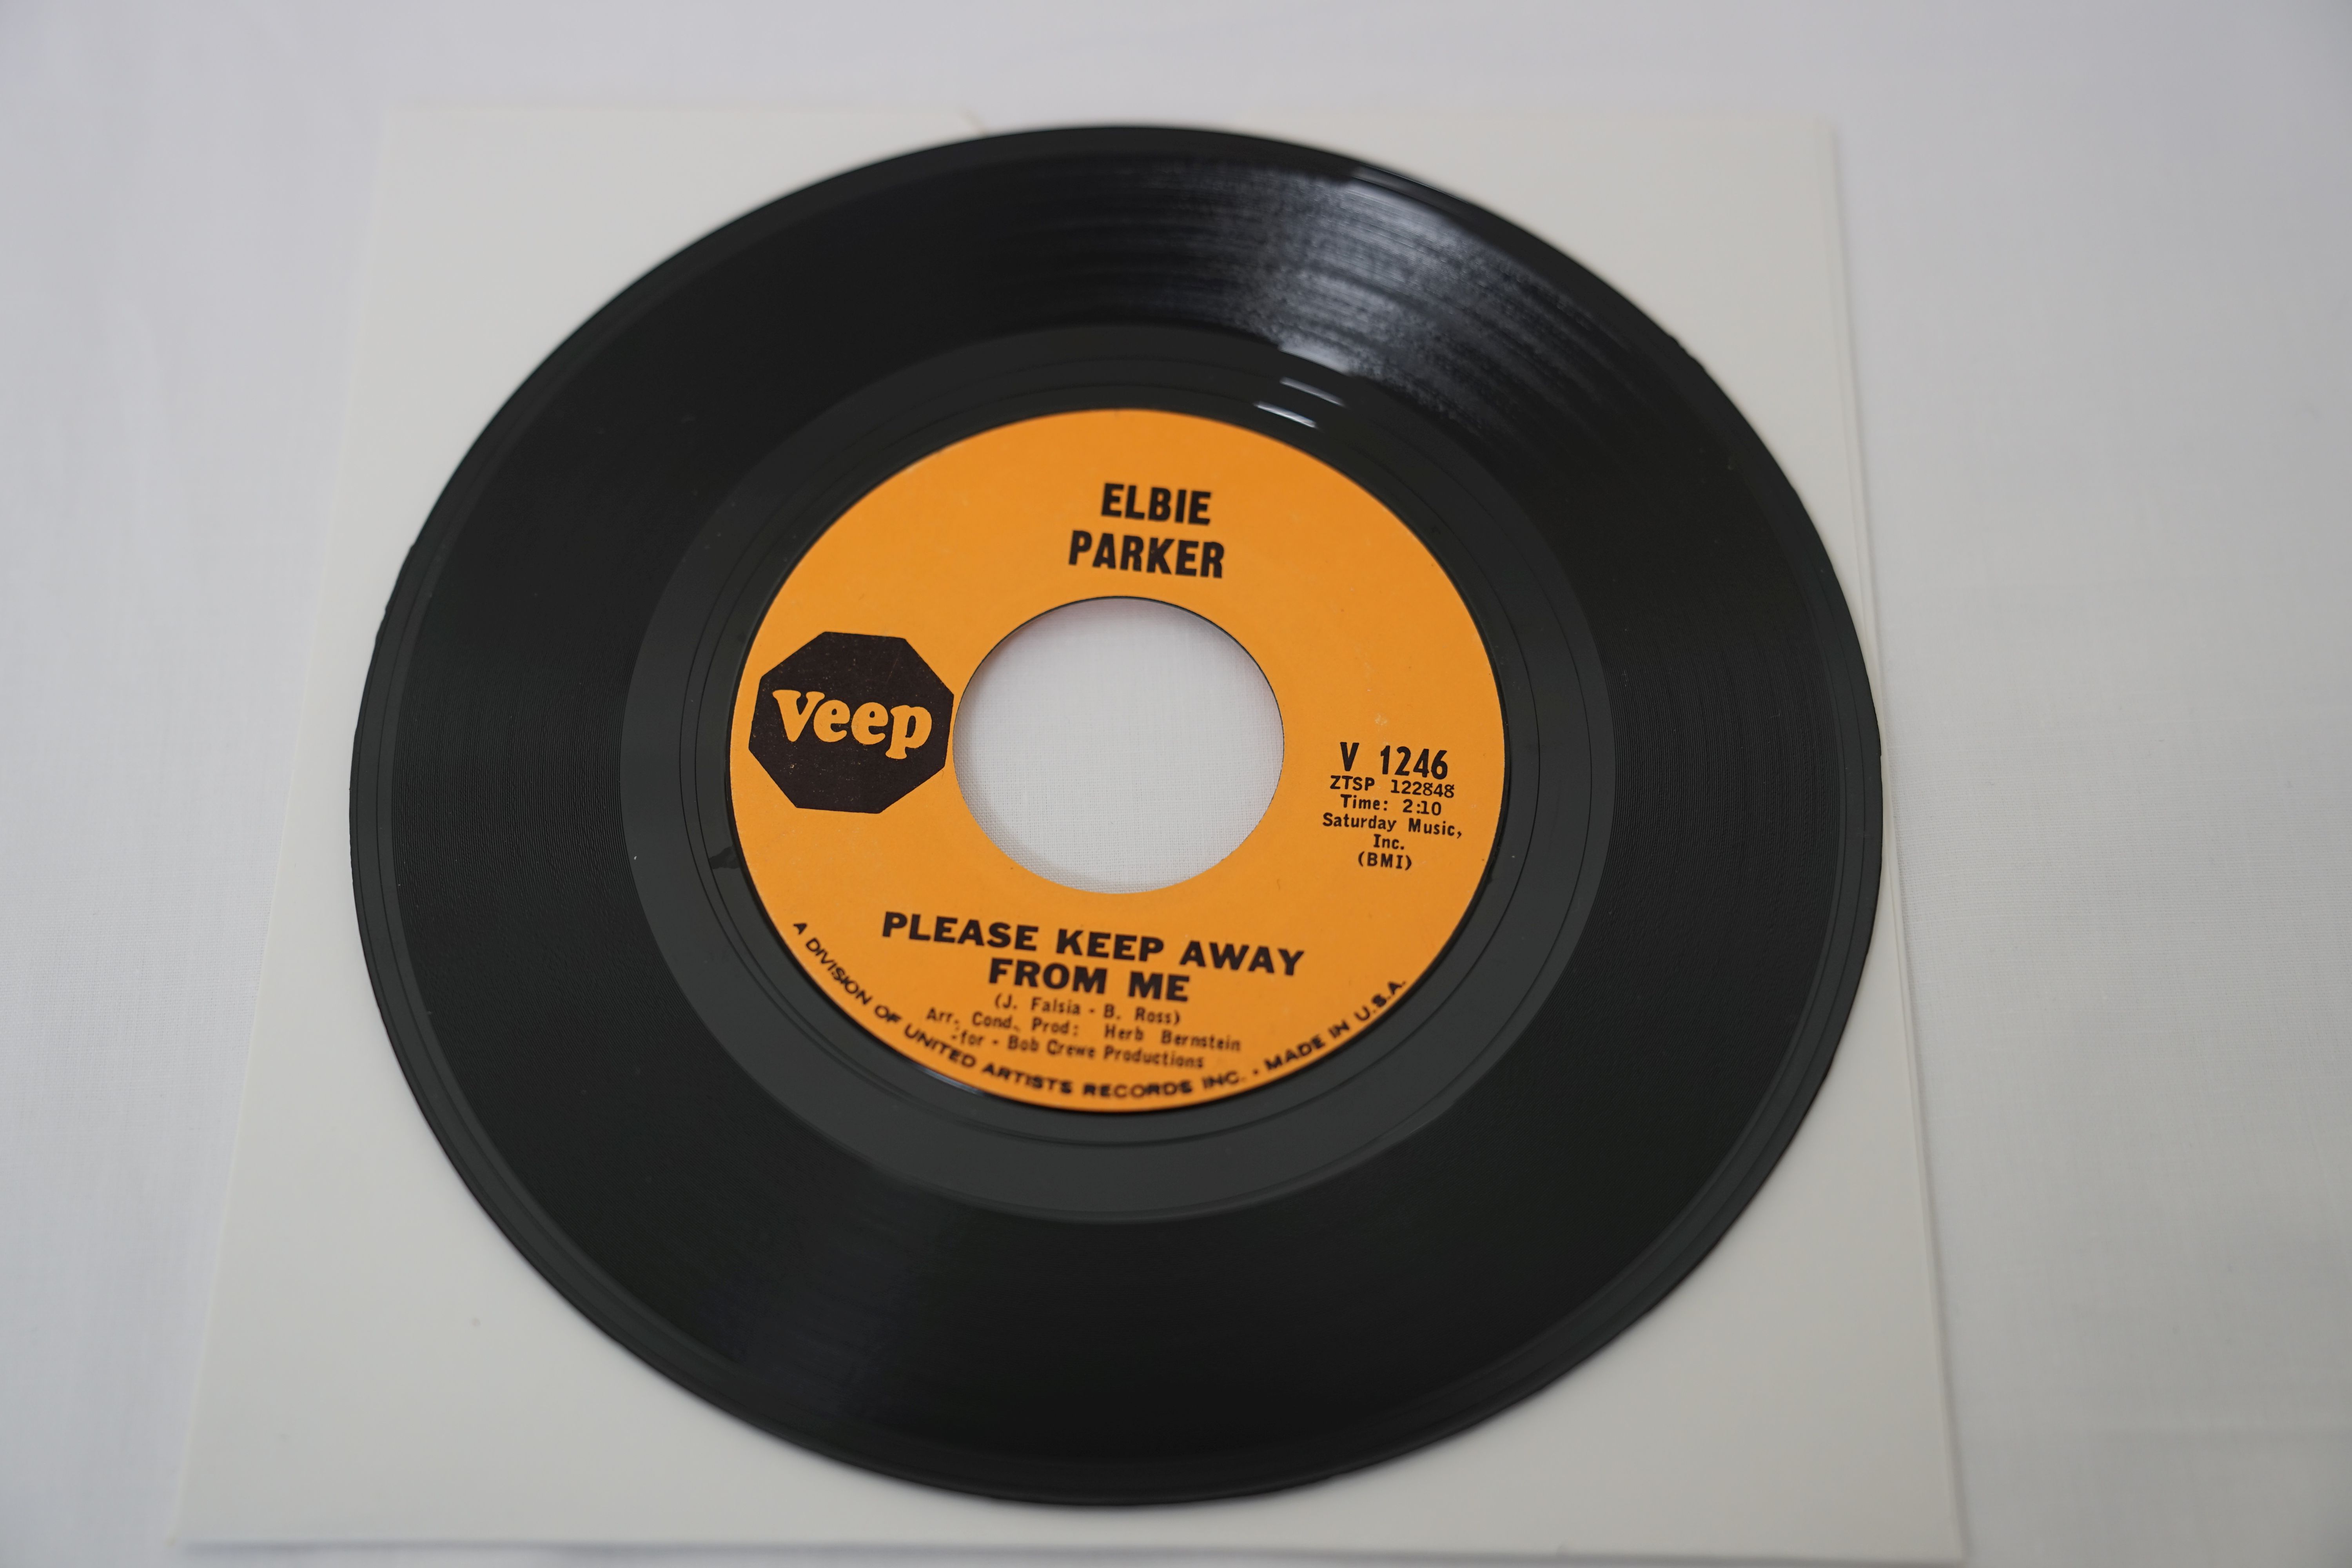 Vinyl - Elbie Parker - Please Keep Away From Me (Veep Records V 1246) EX+ to NM. A rare original - Image 2 of 4